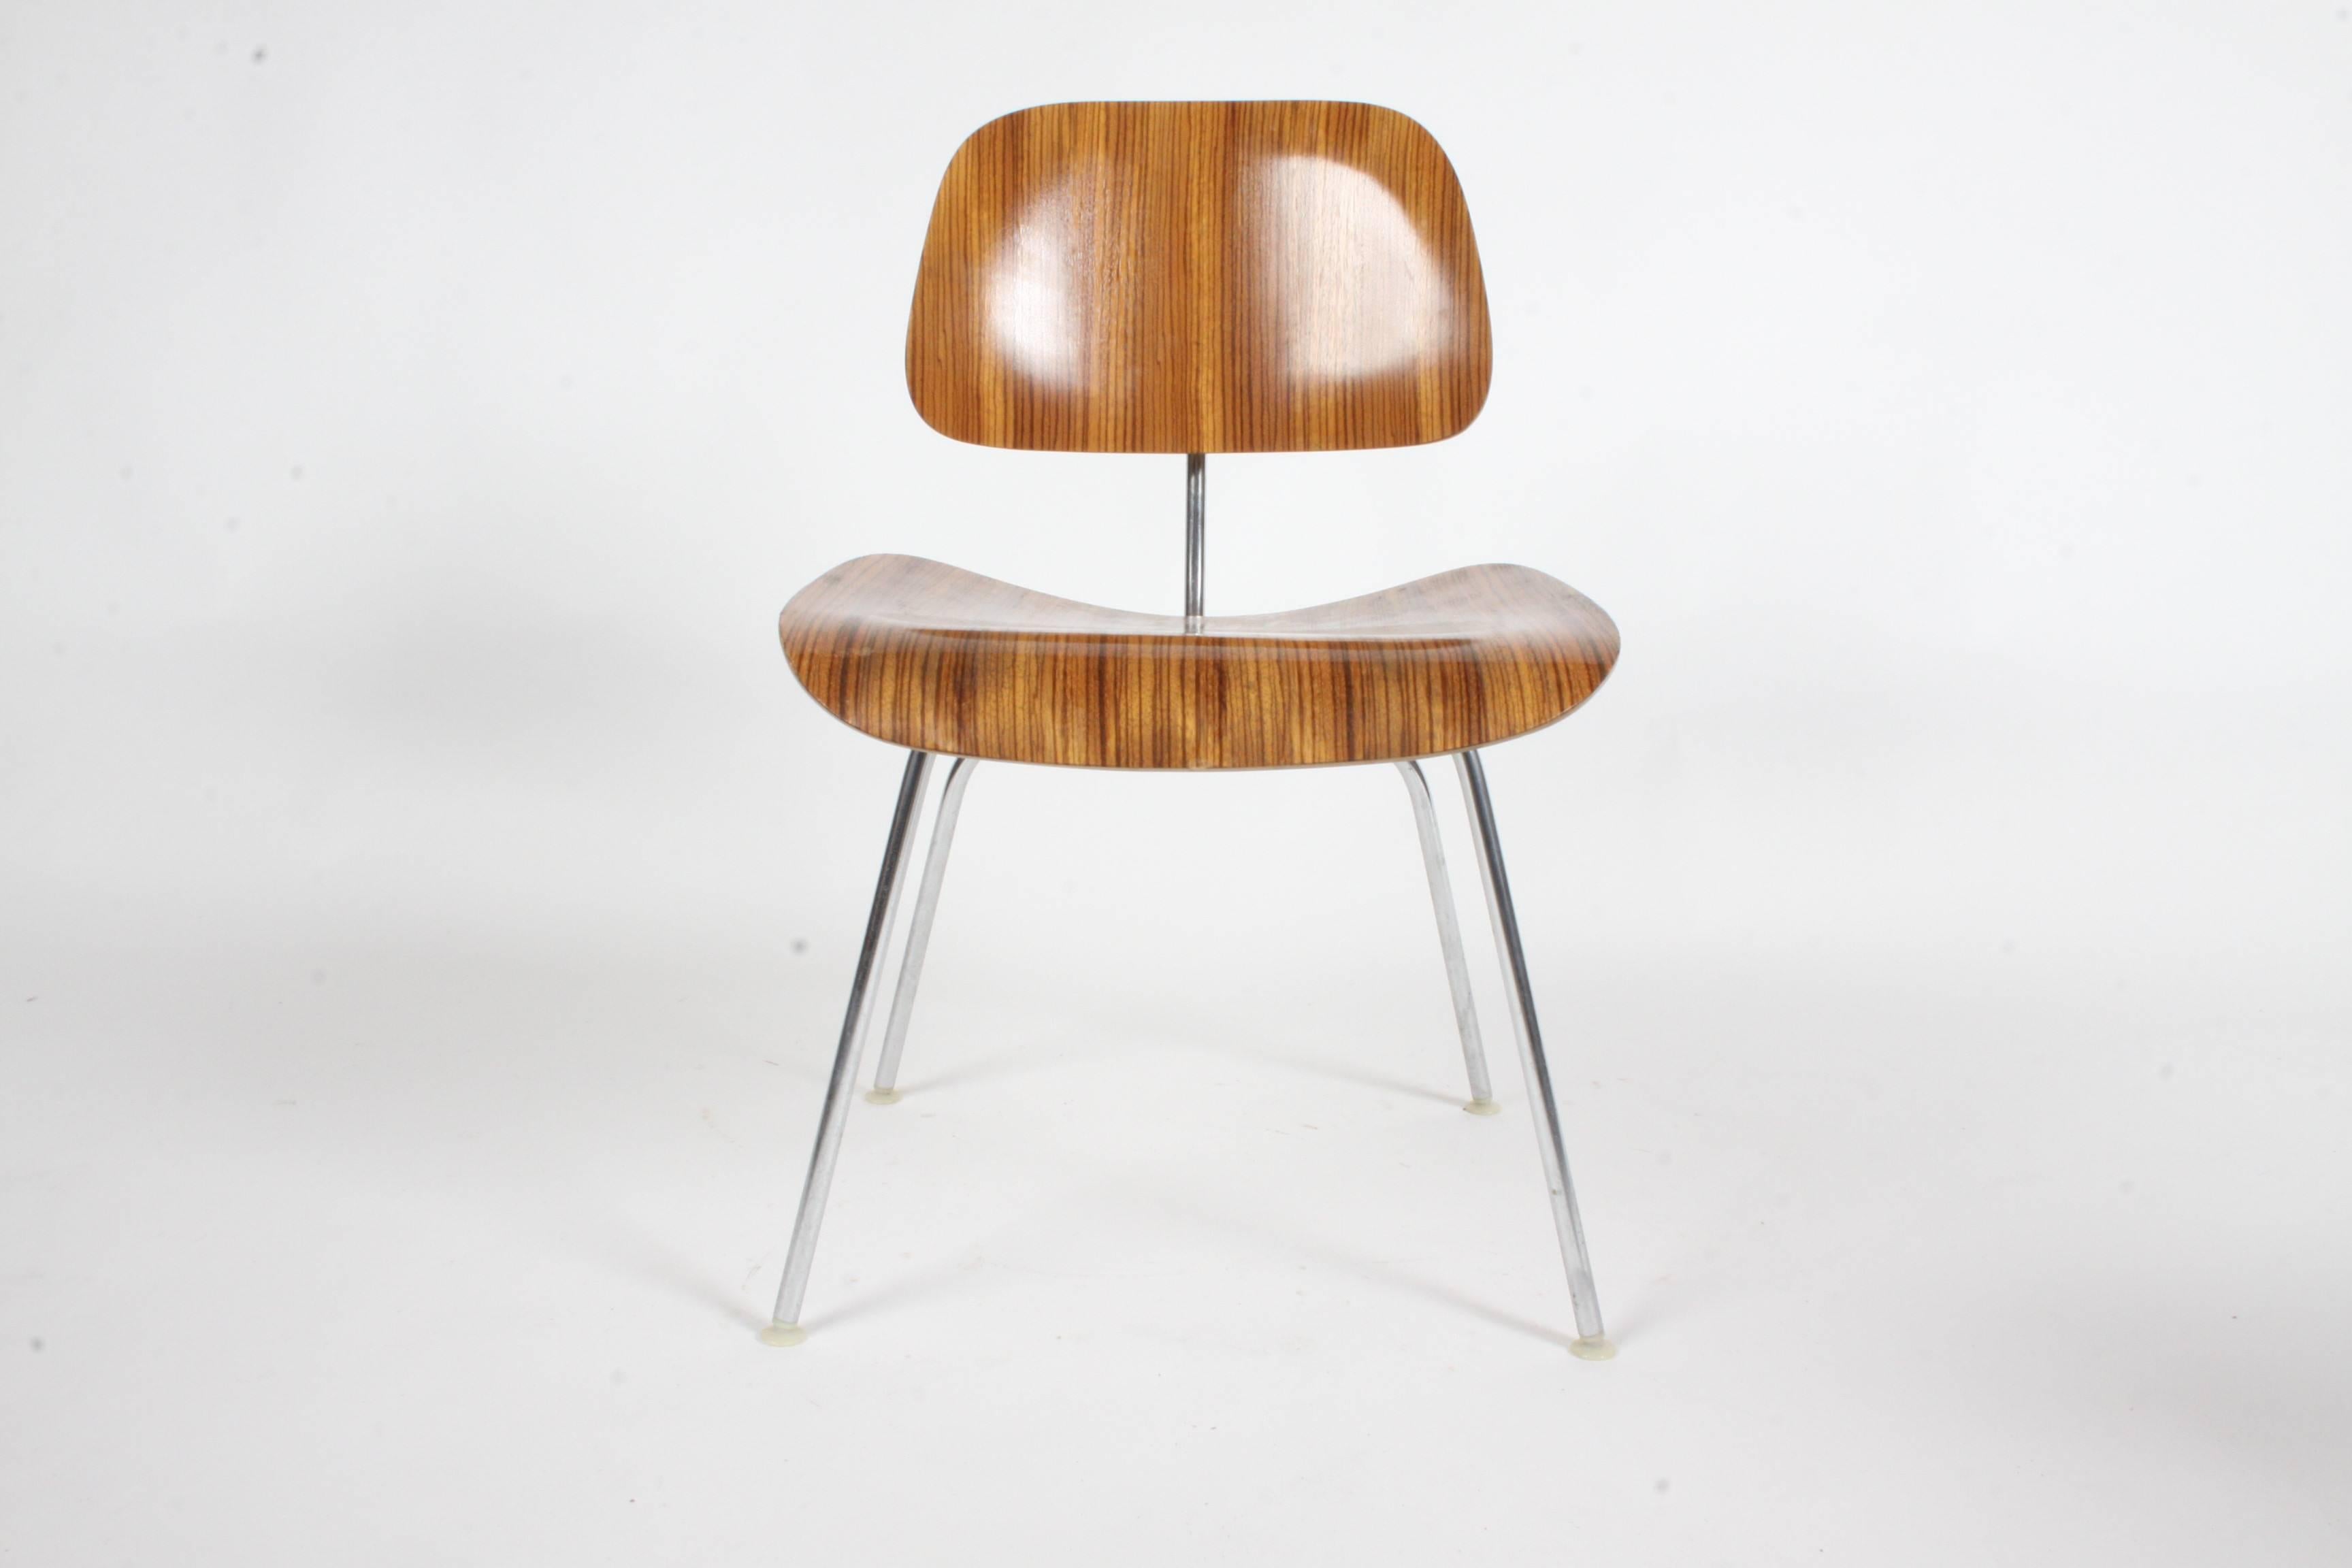 Pair of Charles Eames for Herman Miller Zebrawood DCM chairs - rare set. Zebrawood was used from 1954-1959. Very nice original condition, minor scuffs. Labels.